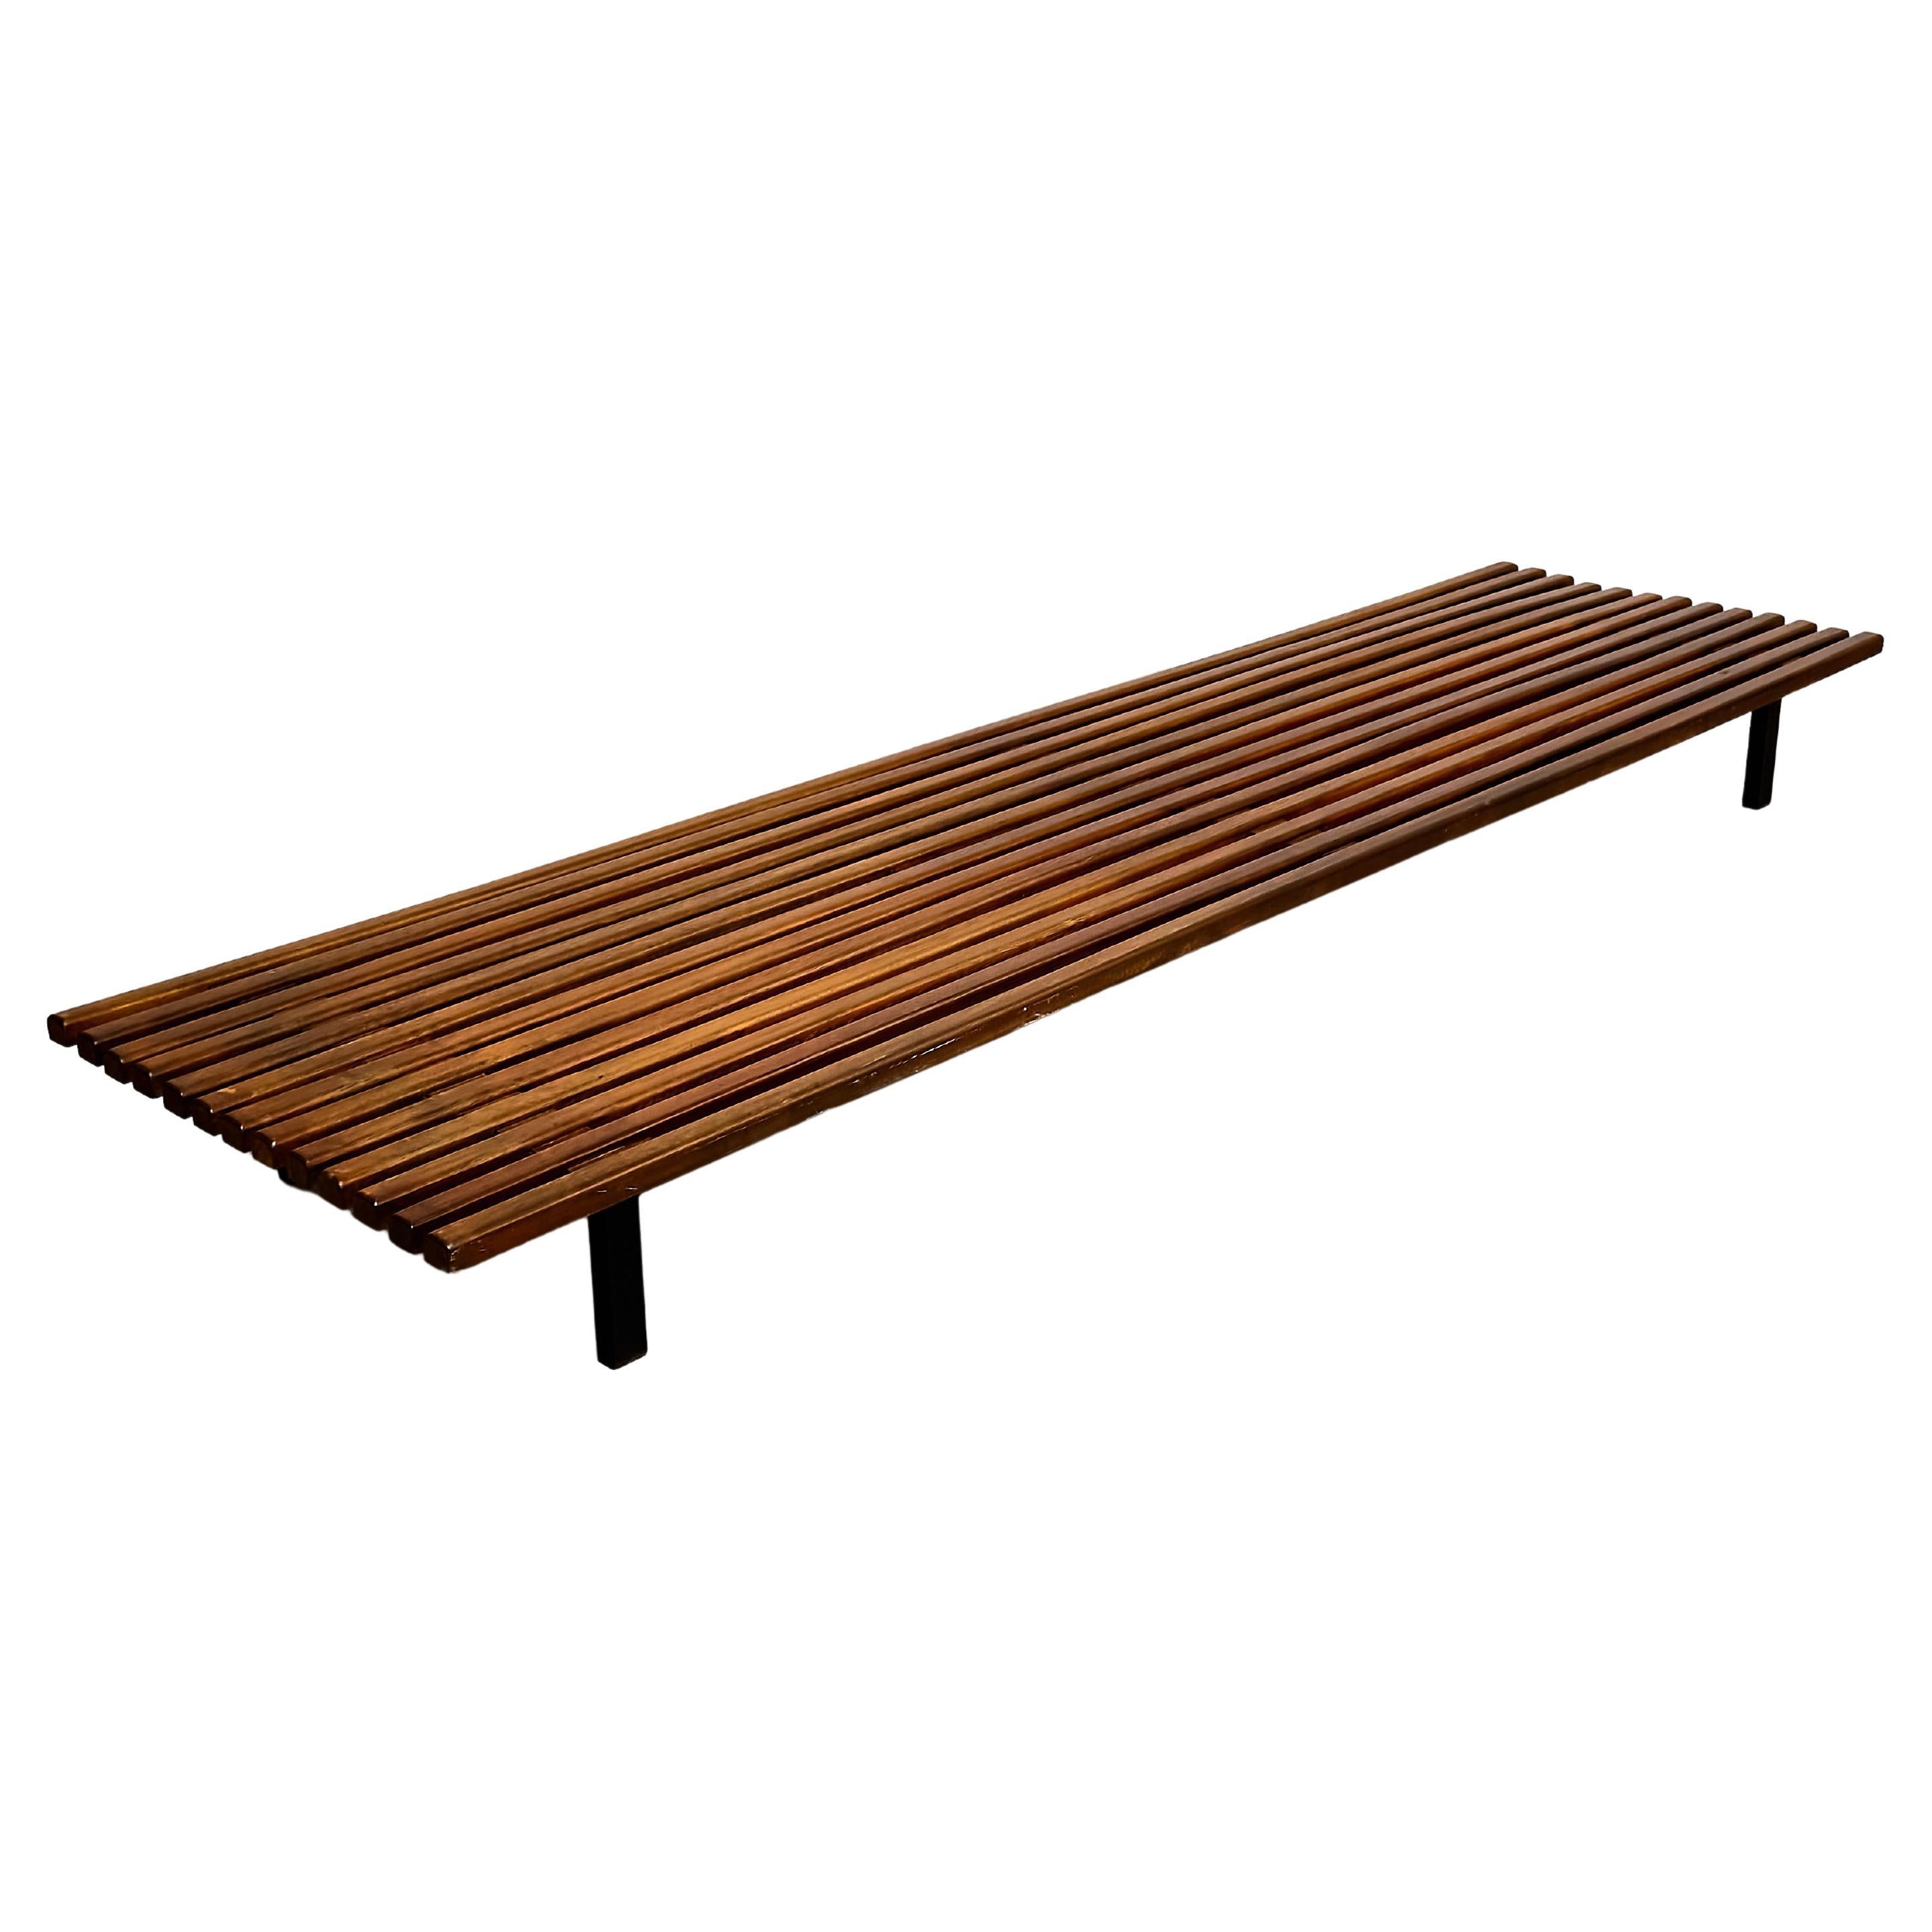 Charlotte Perriand Cansado Bench, circa 1950 For Sale at 1stDibs